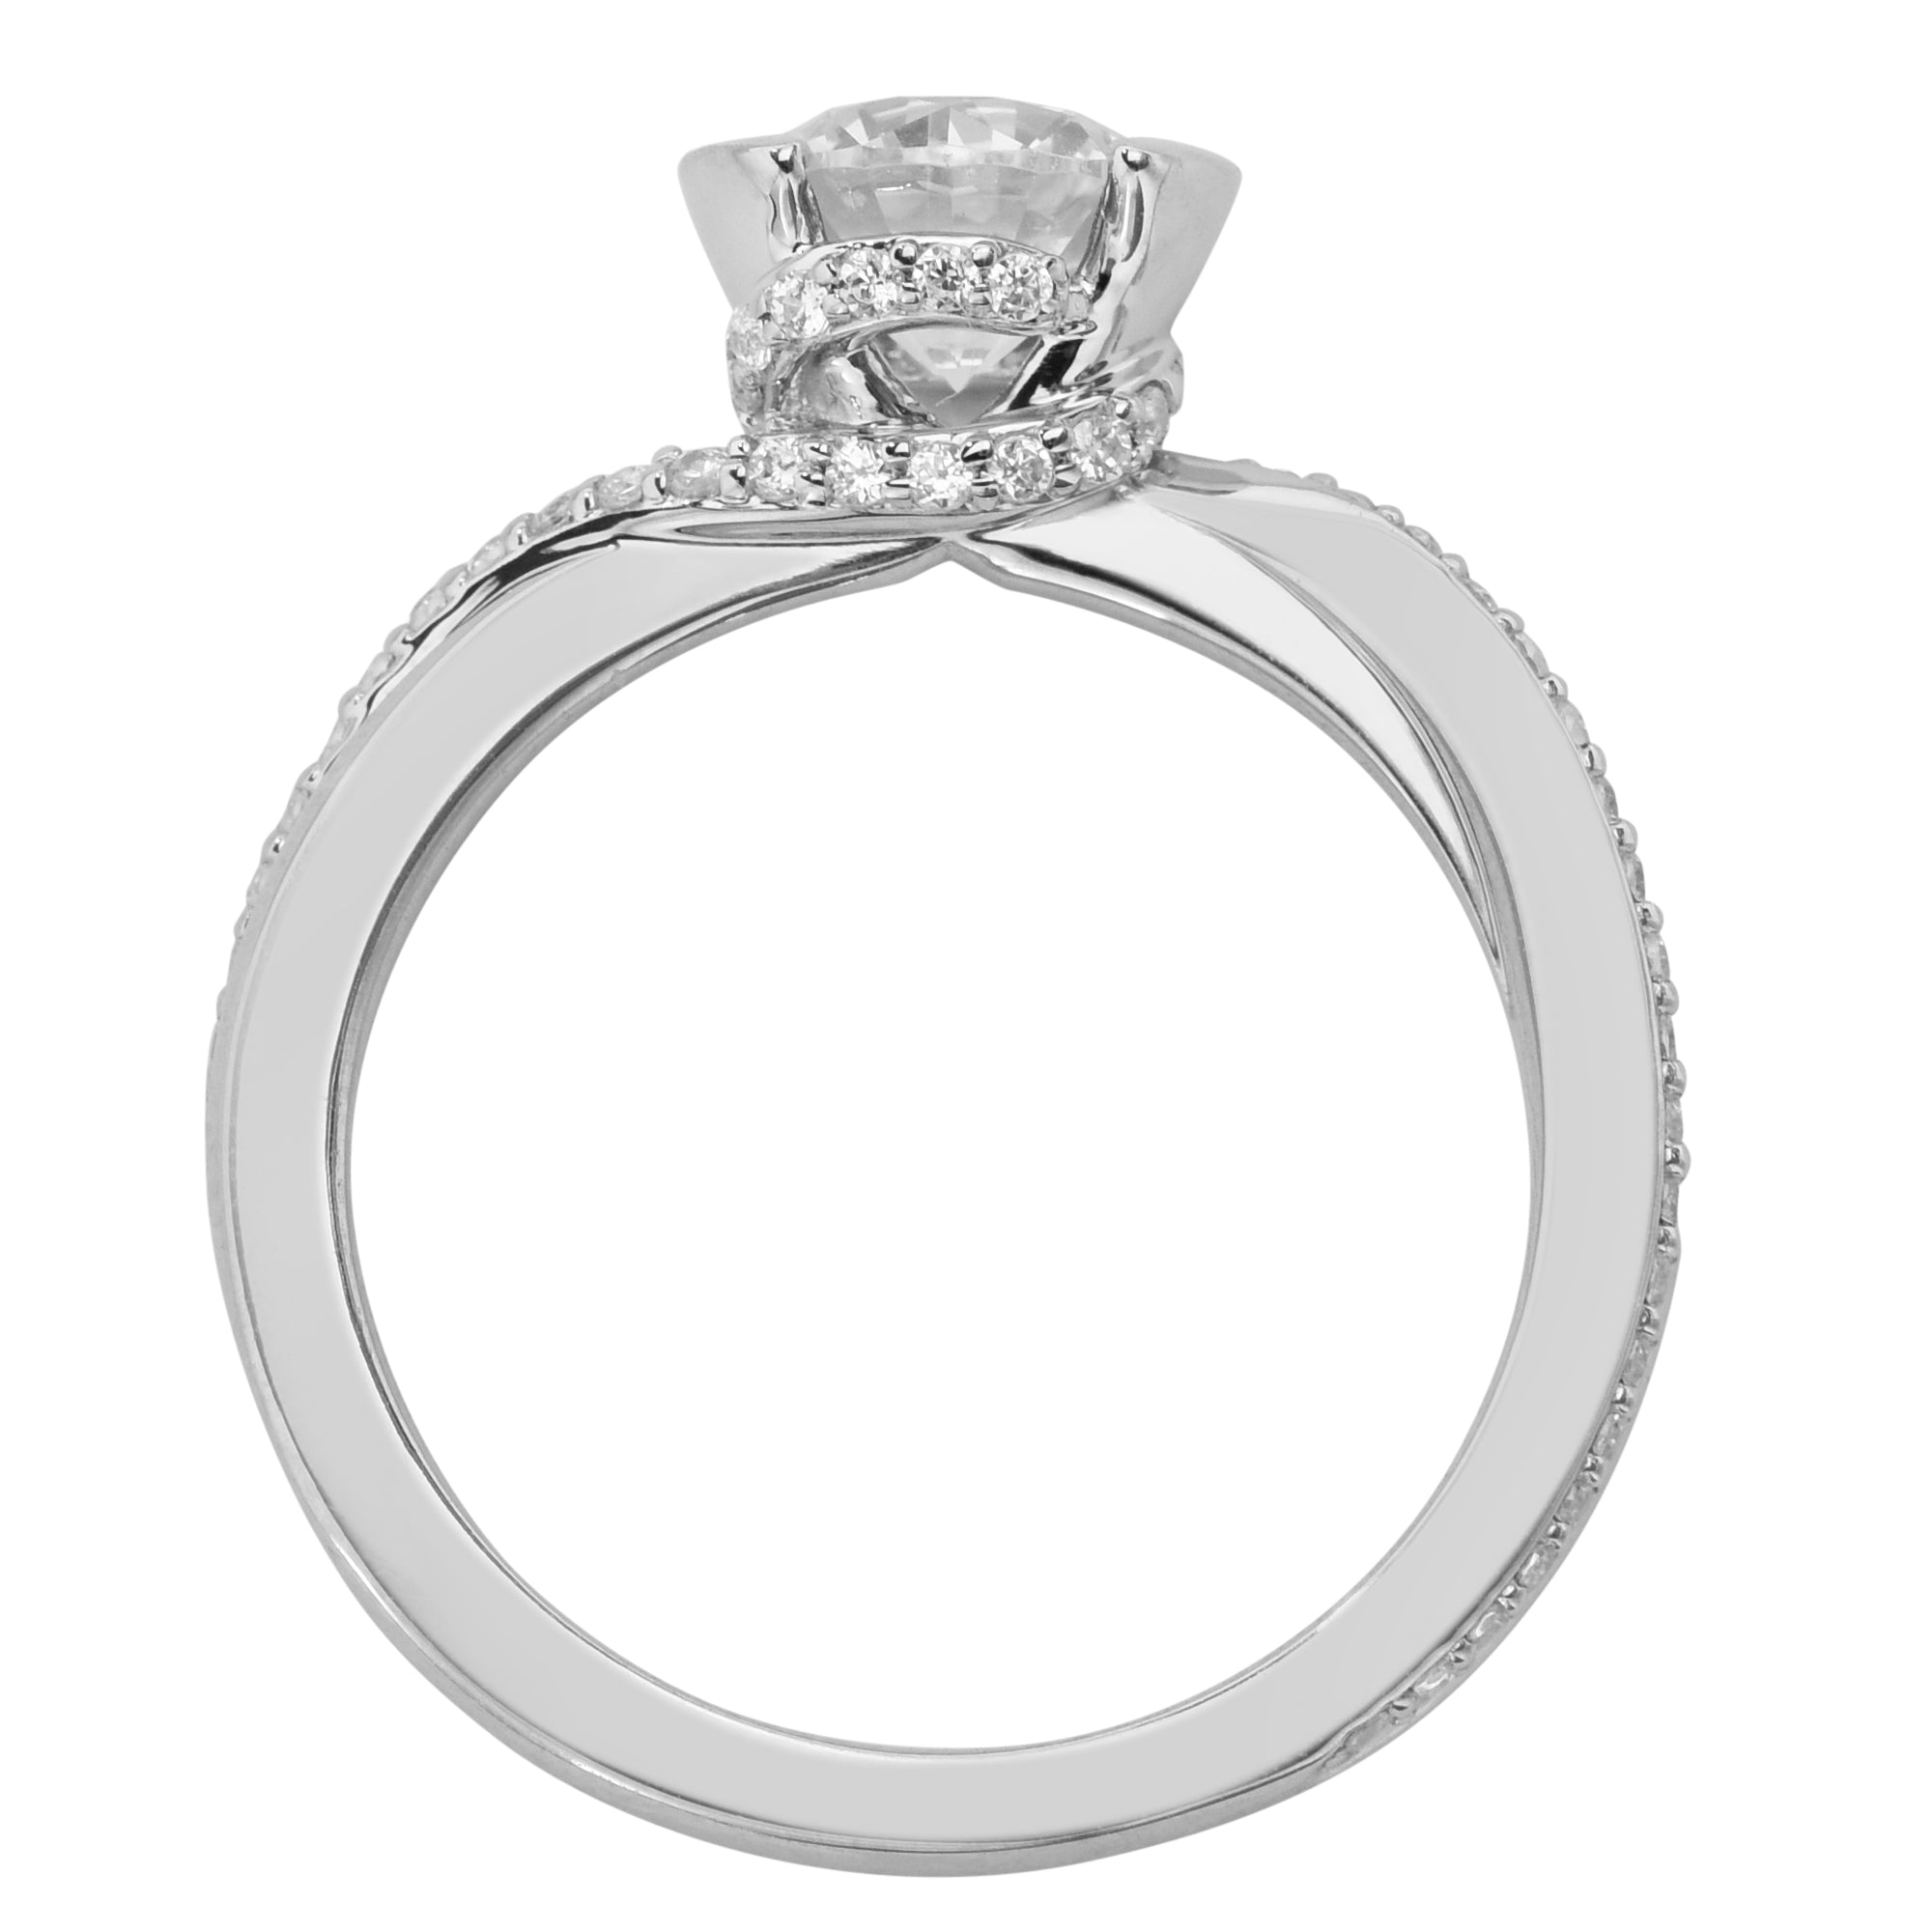 Artcarved Zola Diamond Setting in 14kt White (1/3ct tw)